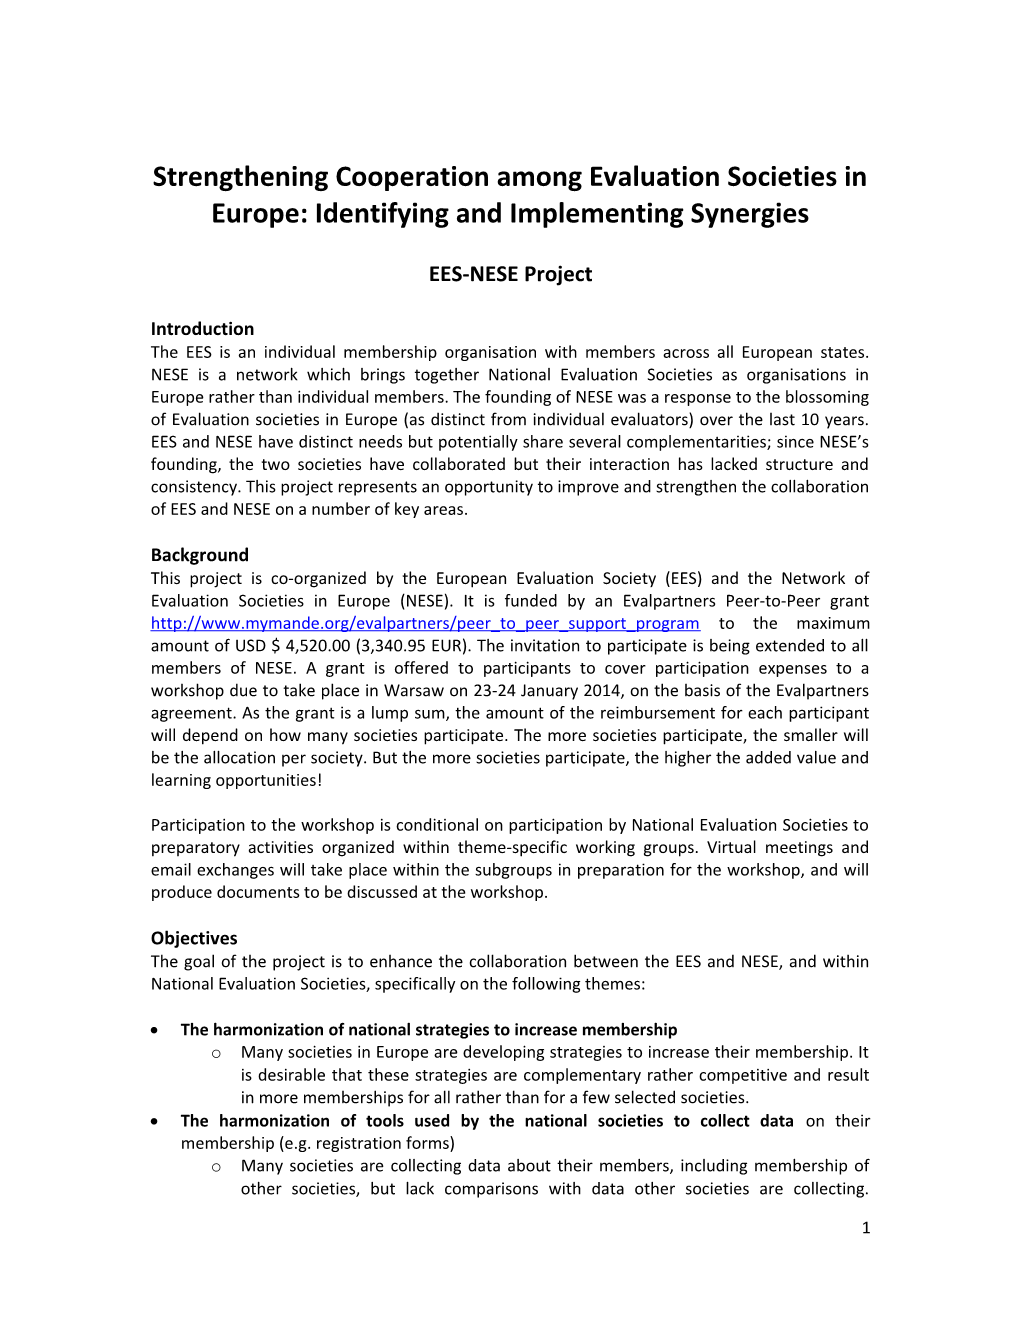 Strengthening Cooperation Among Evaluation Societies in Europe: Identifying and Implementing